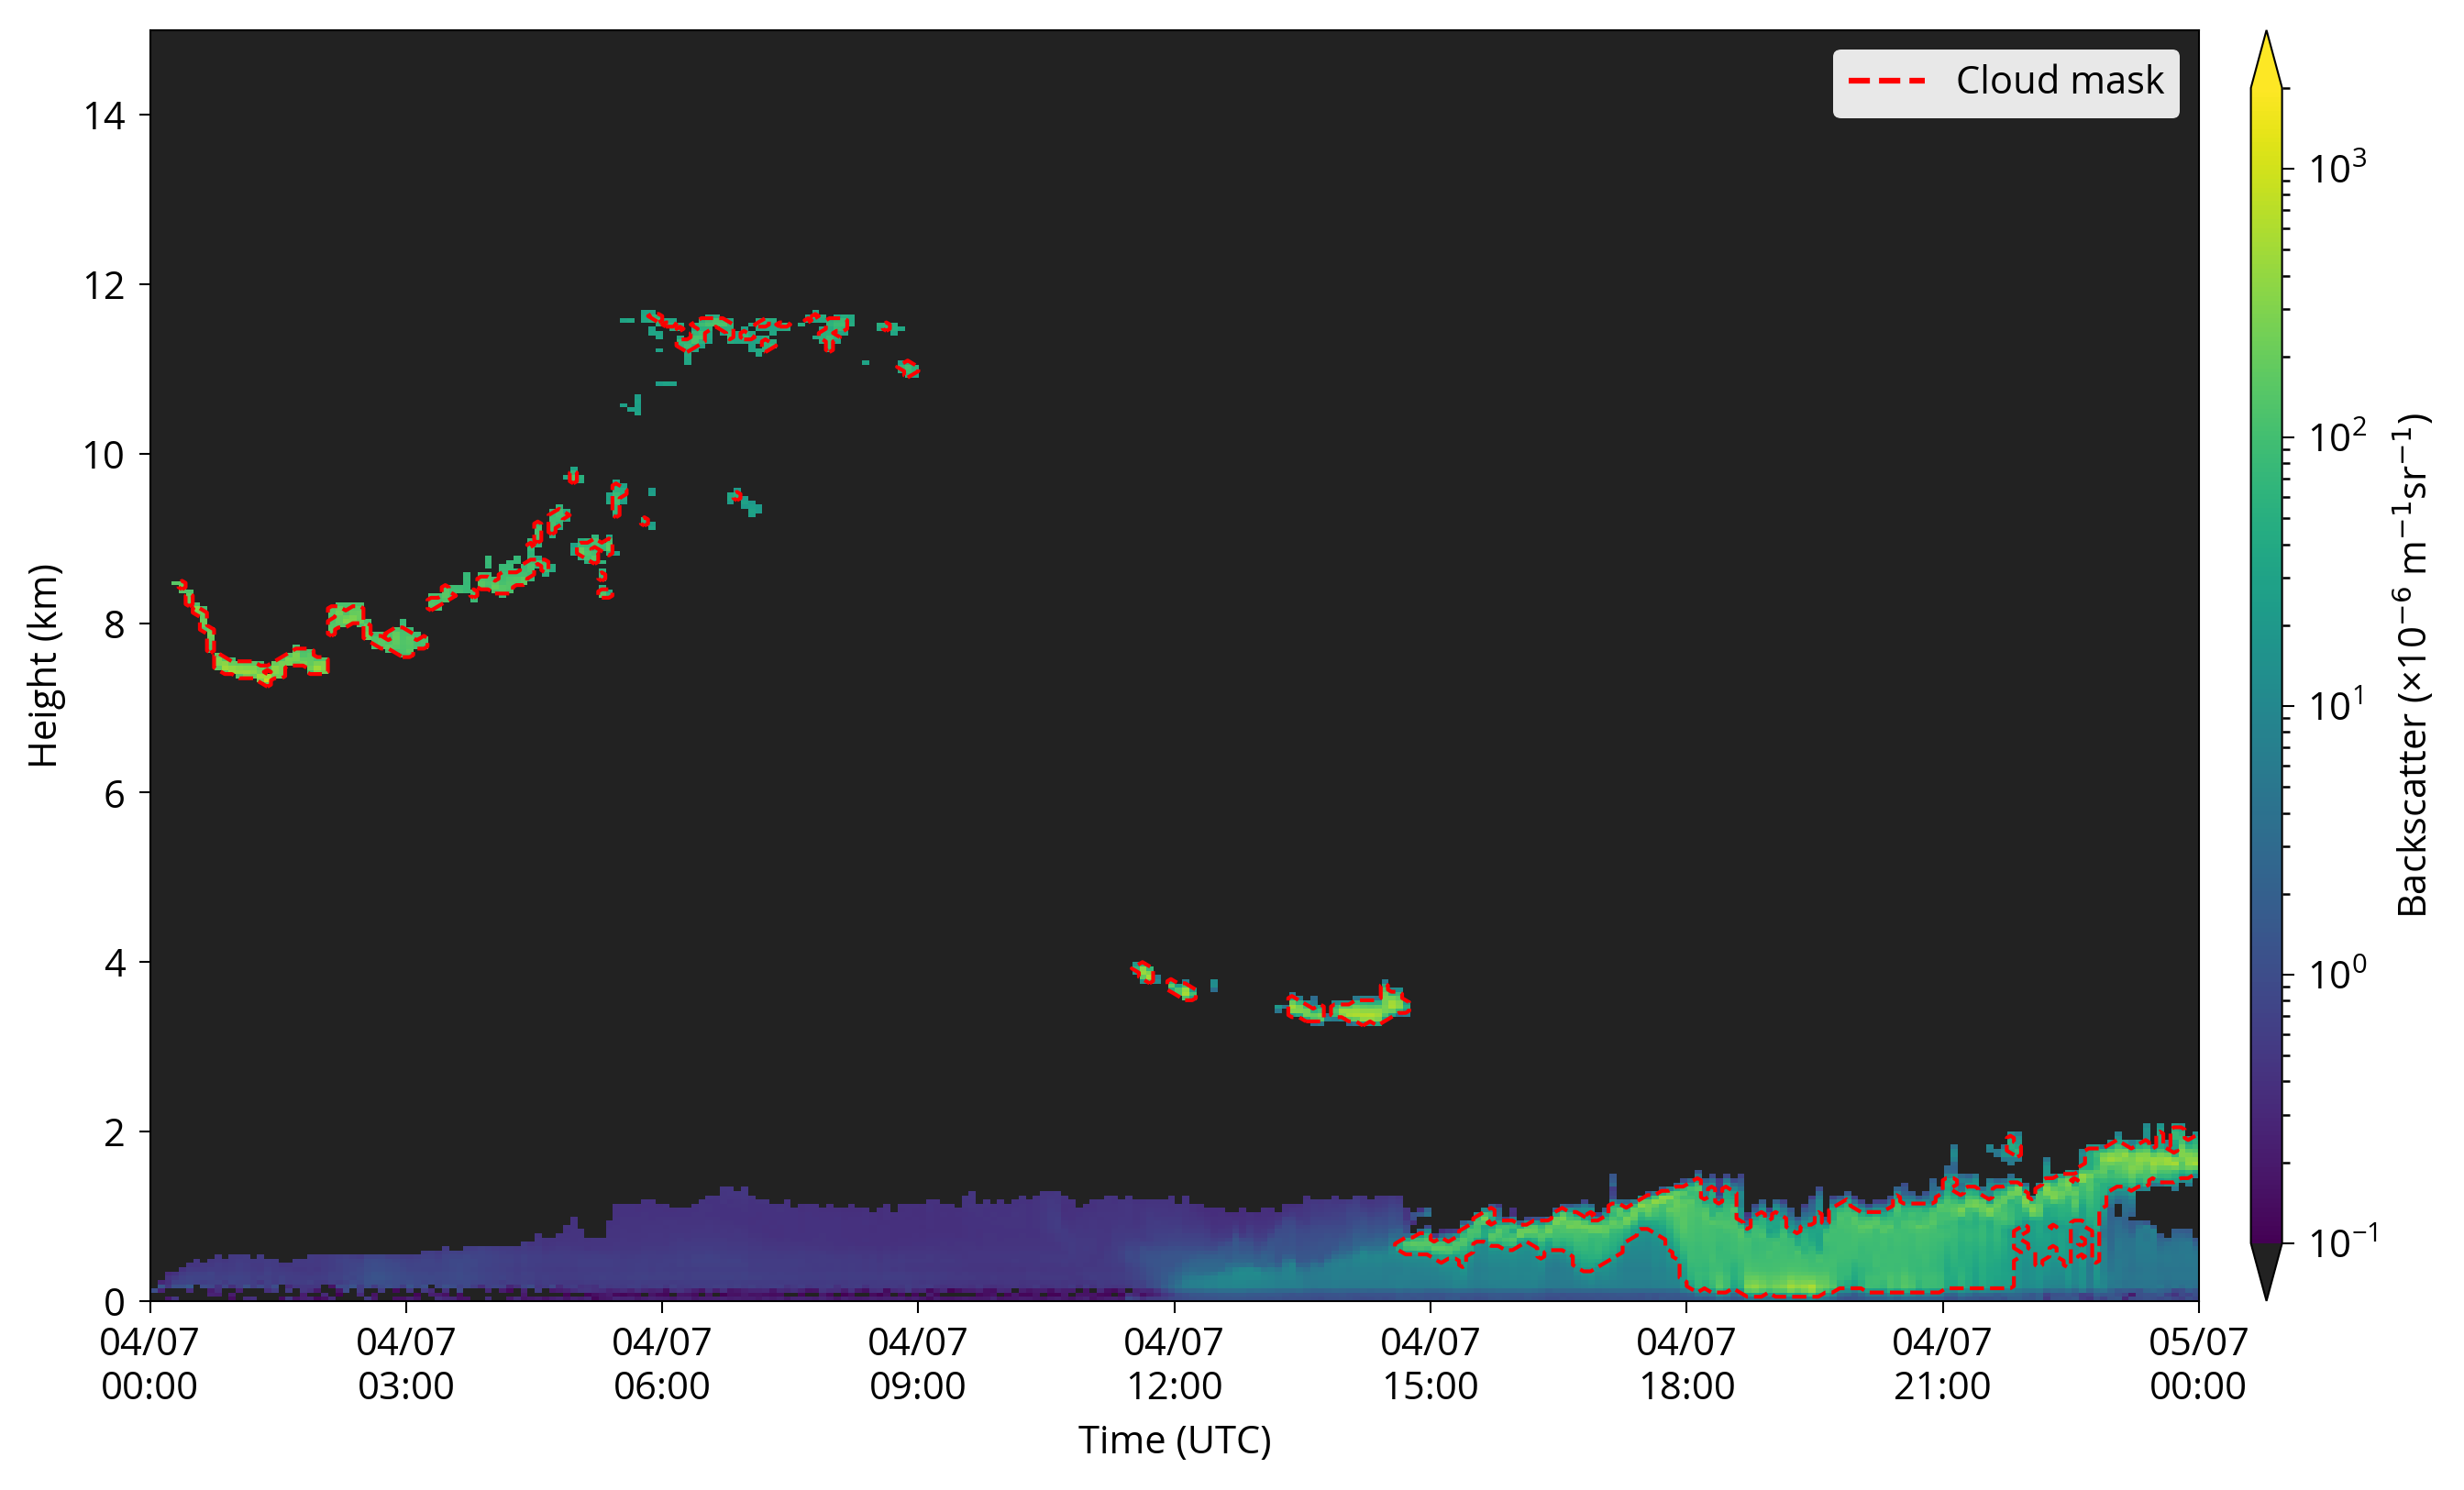 A plot of ceilometer backscatter with detected clouds